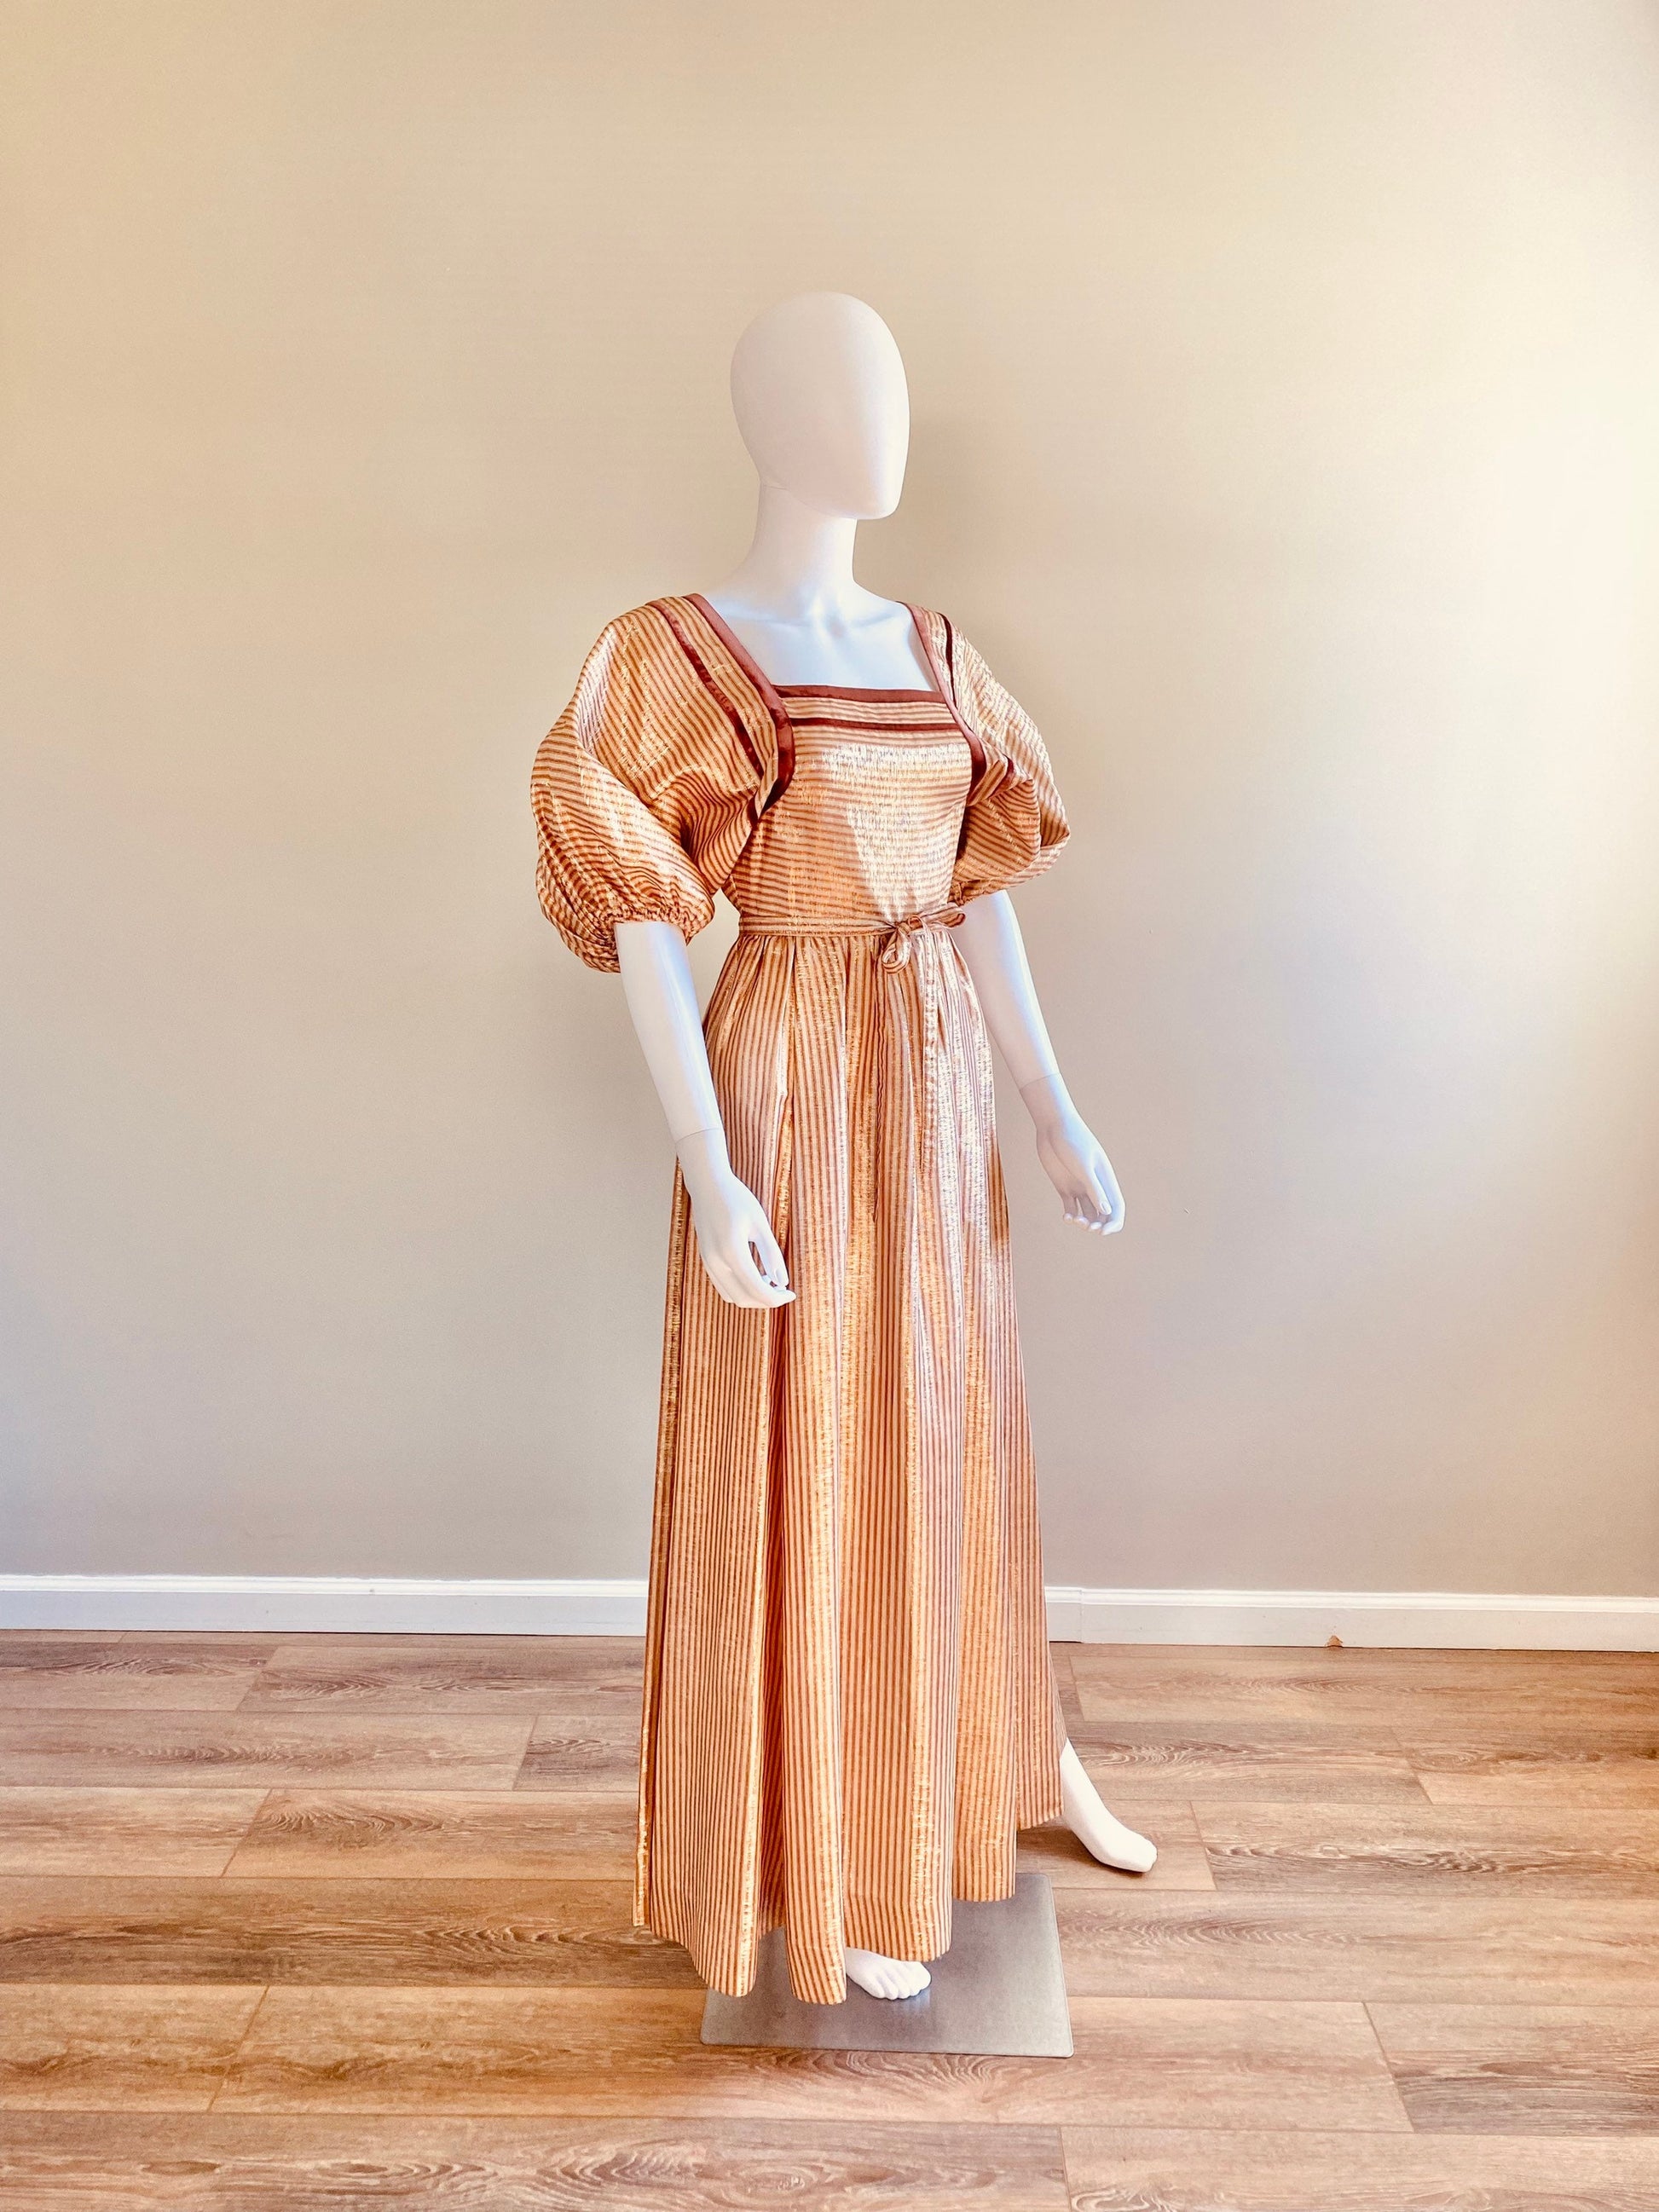 Vintage 1970s puff sleeve Gold and Rust Maxi Dress / 1970s does 1930s formal Albert Nipon dress Size XS